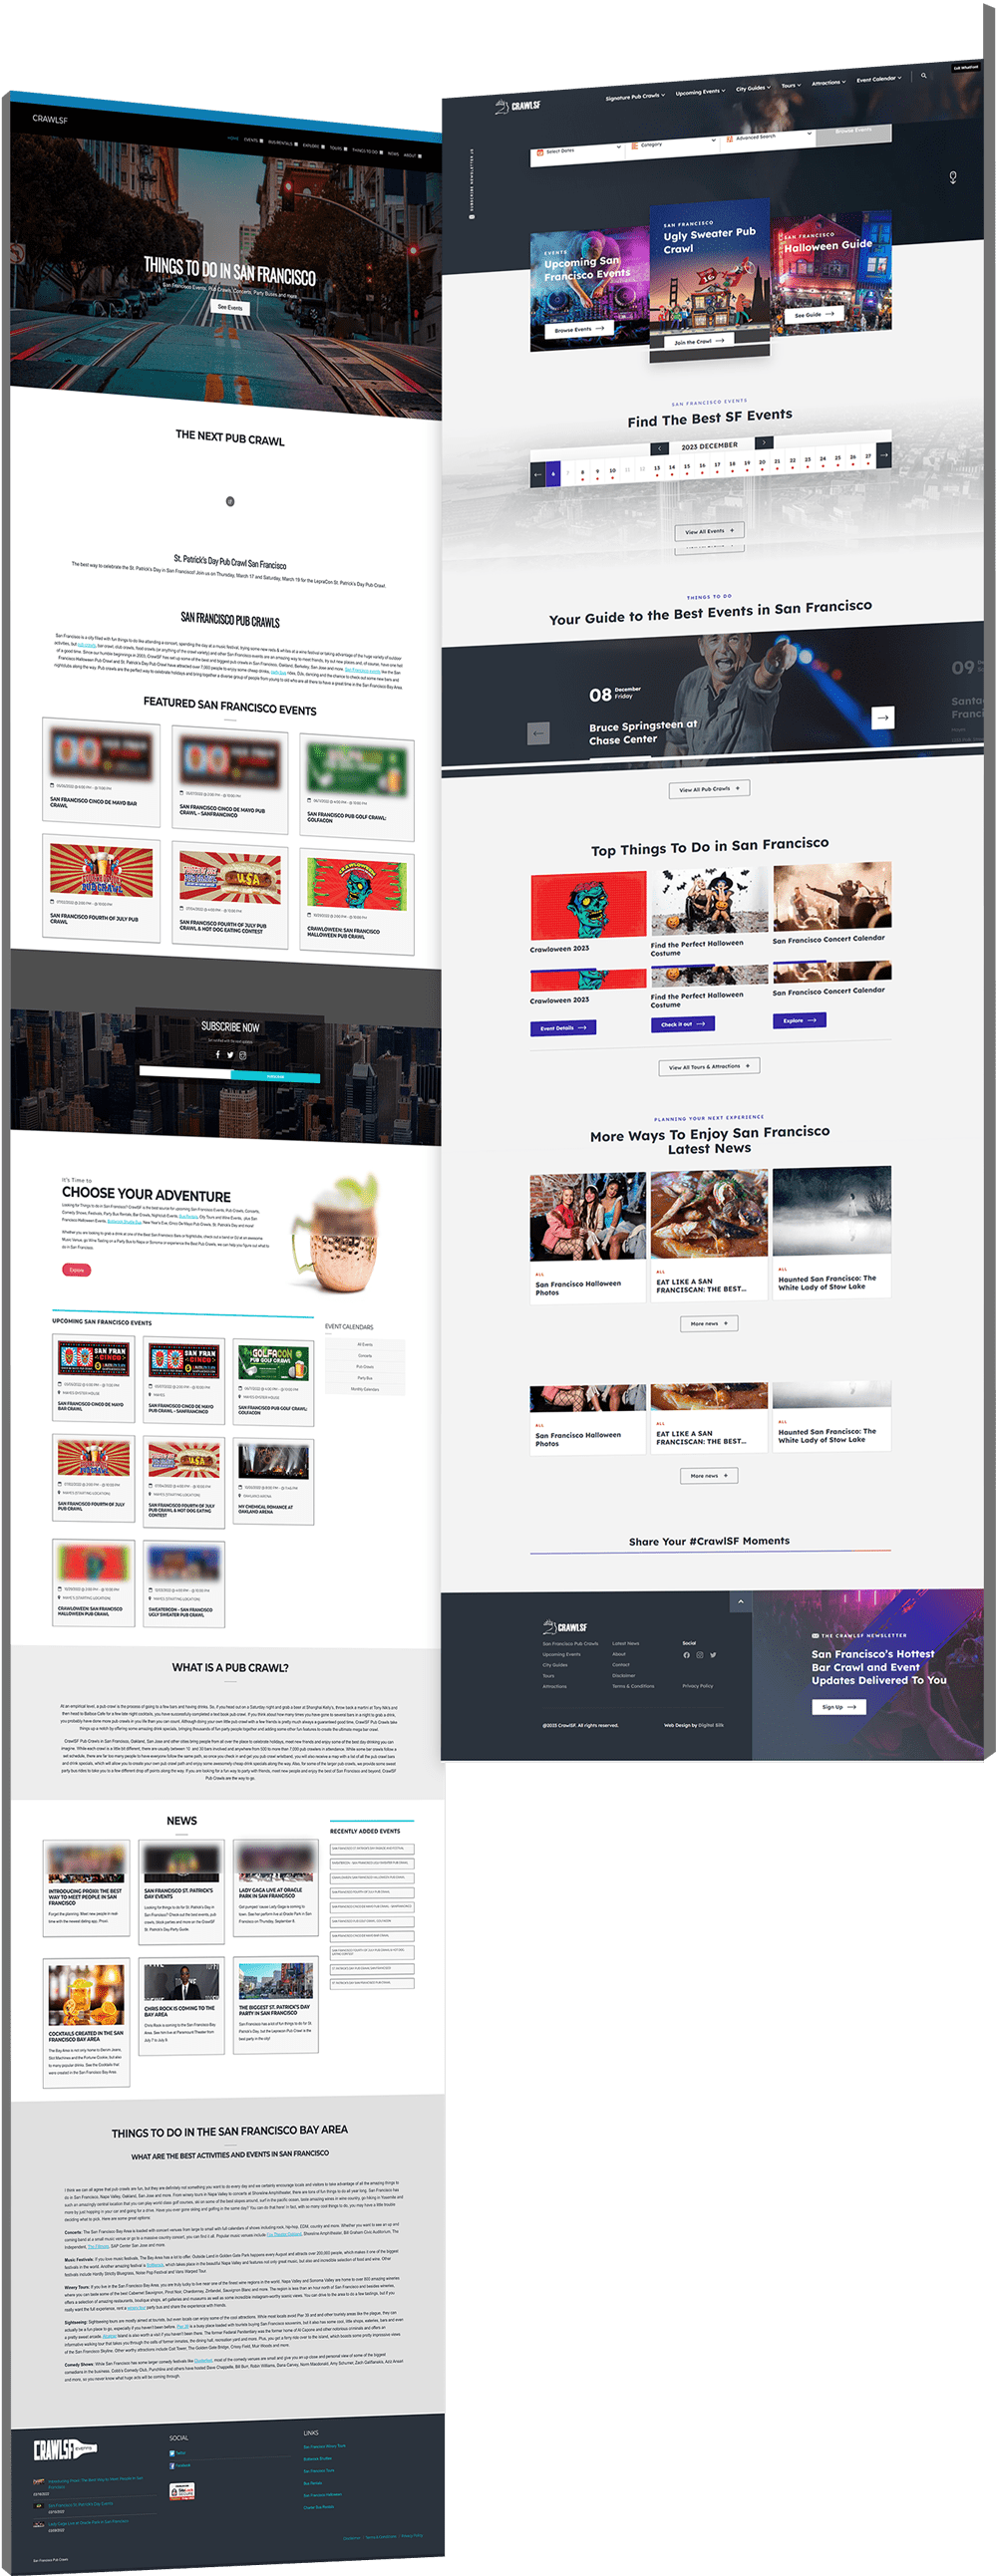 CrawlSF website before and after designs